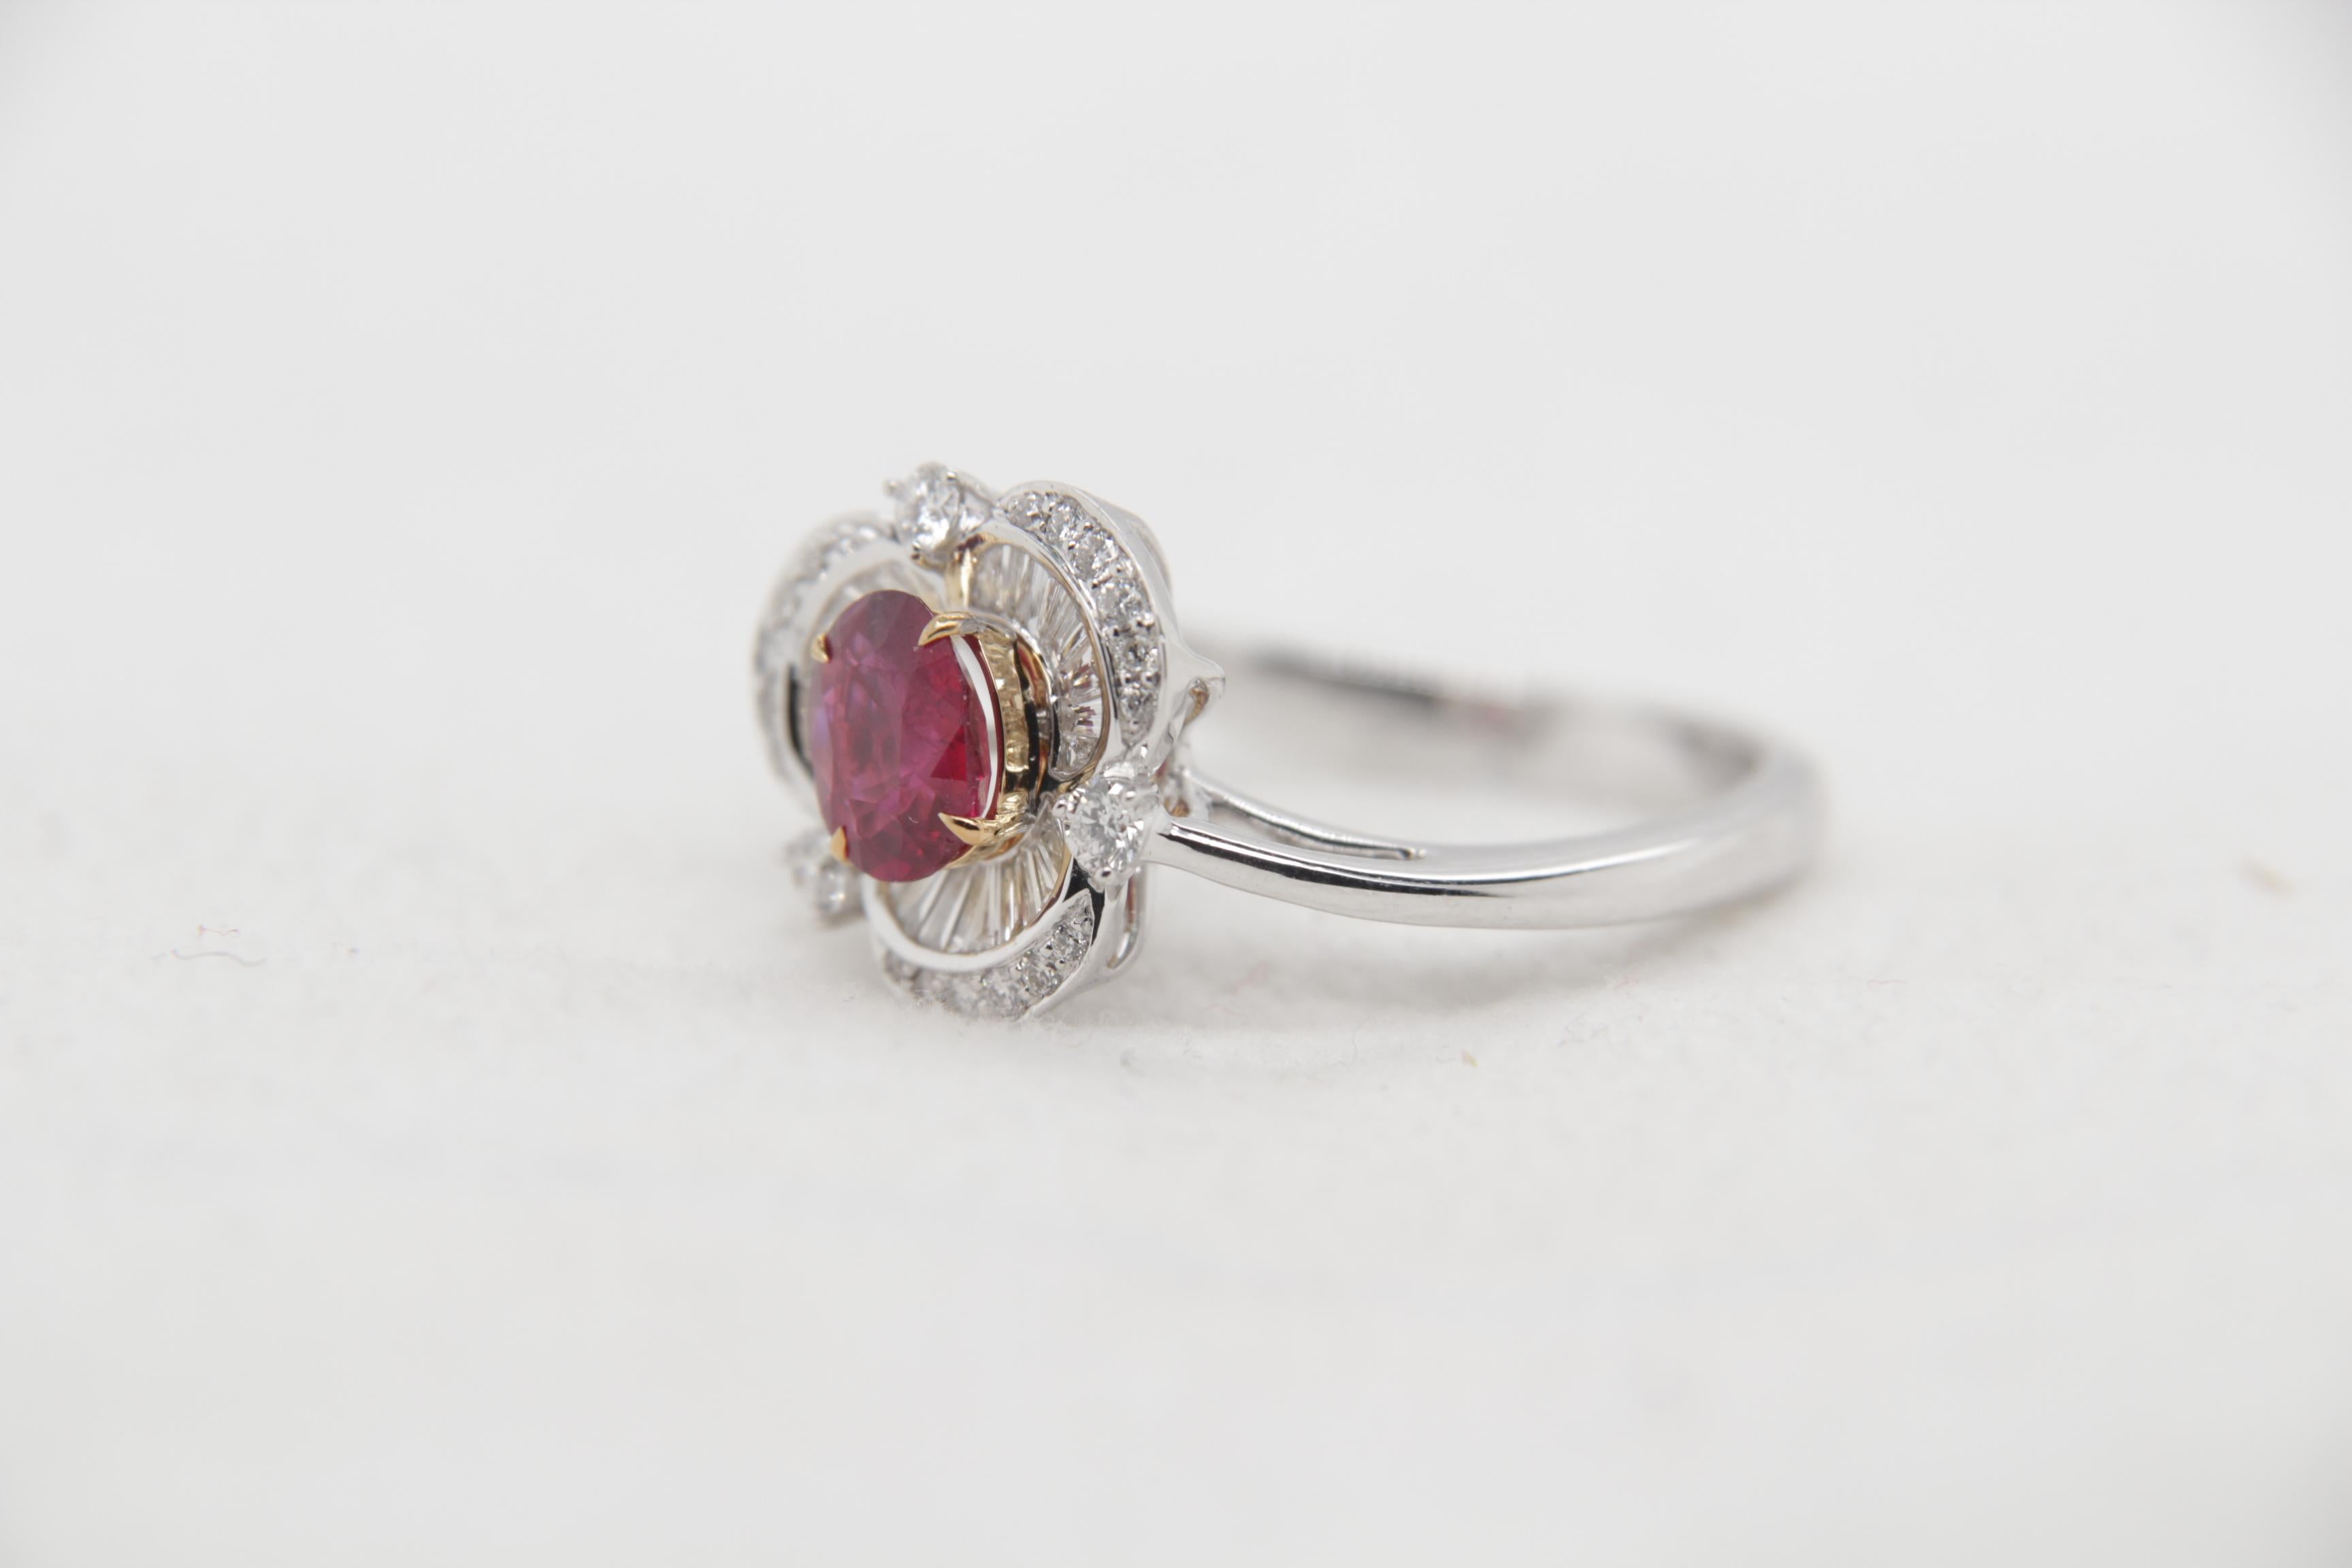 A brand new ruby and diamond ring in 18 Karat Gold. The total ruby weight is 0.76 carats and is certified by Gem Research Swisslab (GRS) as natural, 'no heat' and 'Pigeon's blood'. The total diamond weight is 0.44 carats and total ring weight is